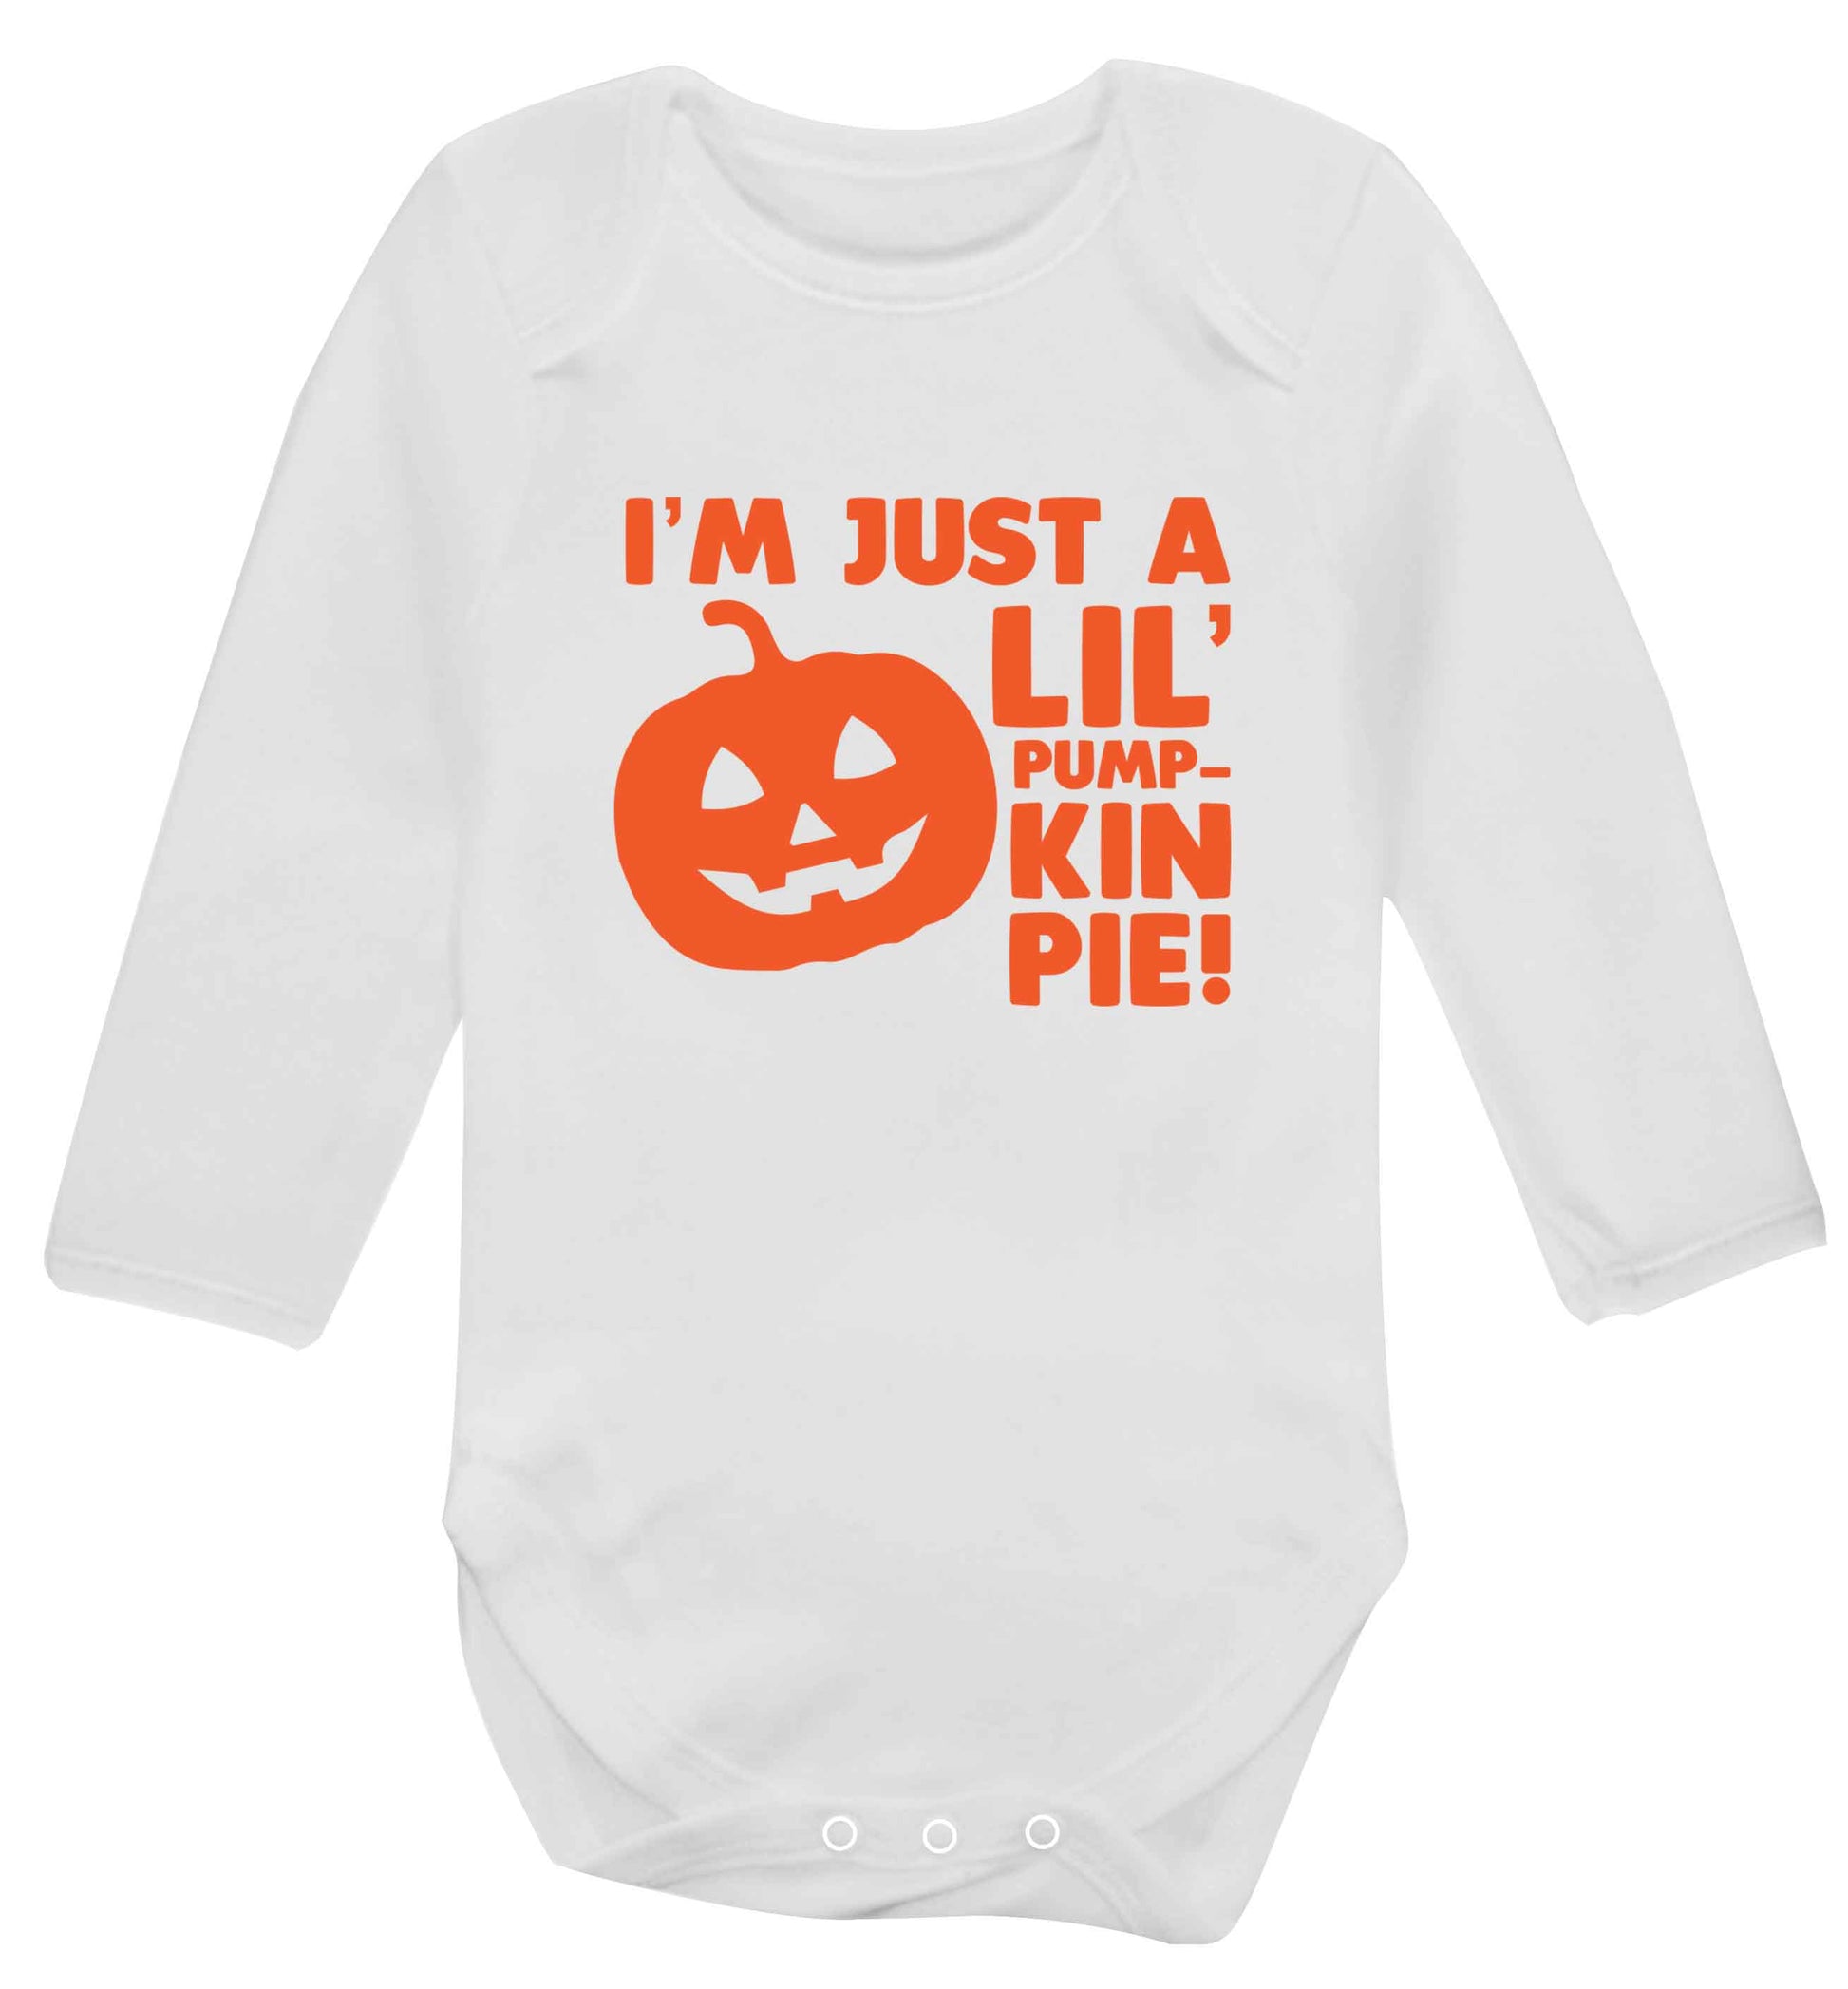 I'm just a lil' pumpkin pie baby vest long sleeved white 6-12 months